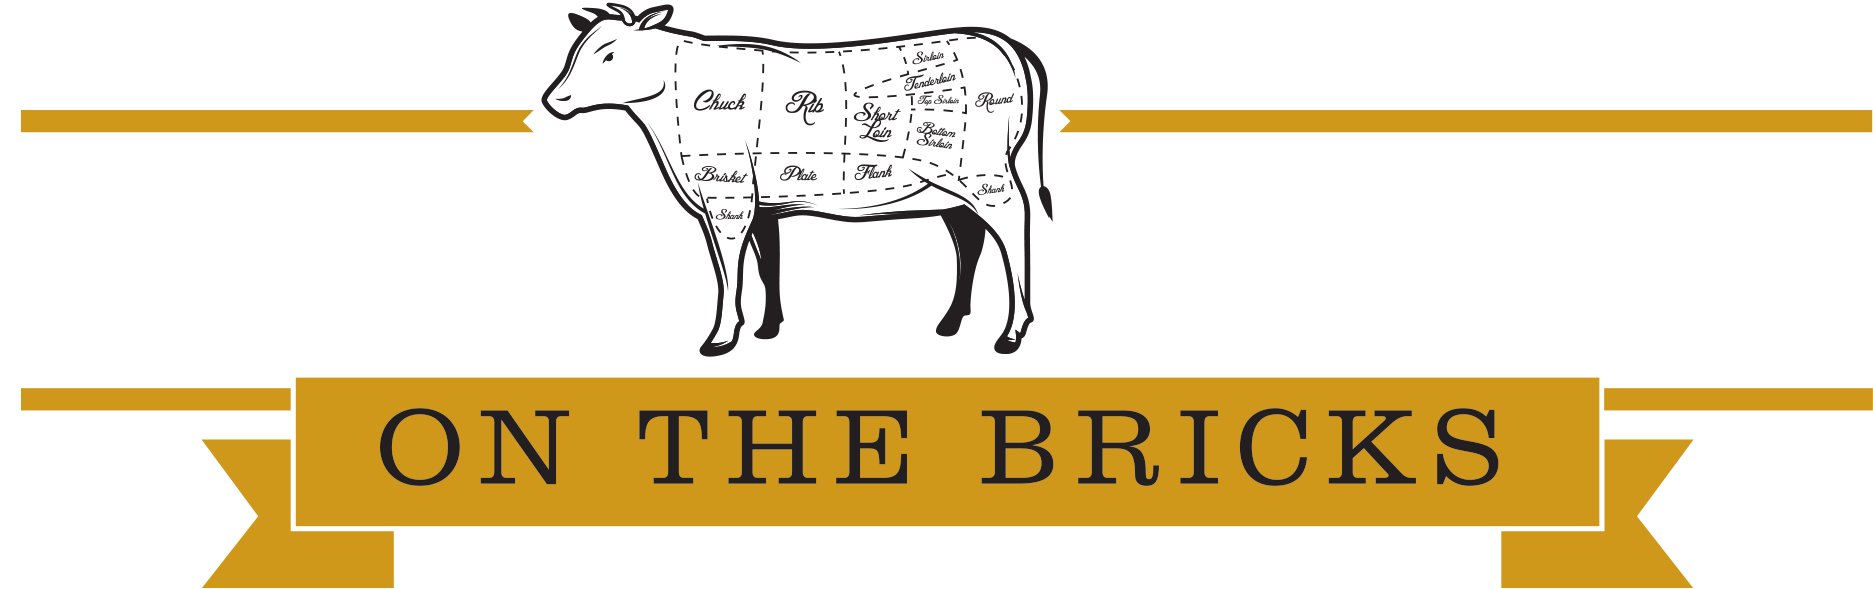 Chop House On The Bricks - Chophouse On The Bricks (1873x589), Png Download